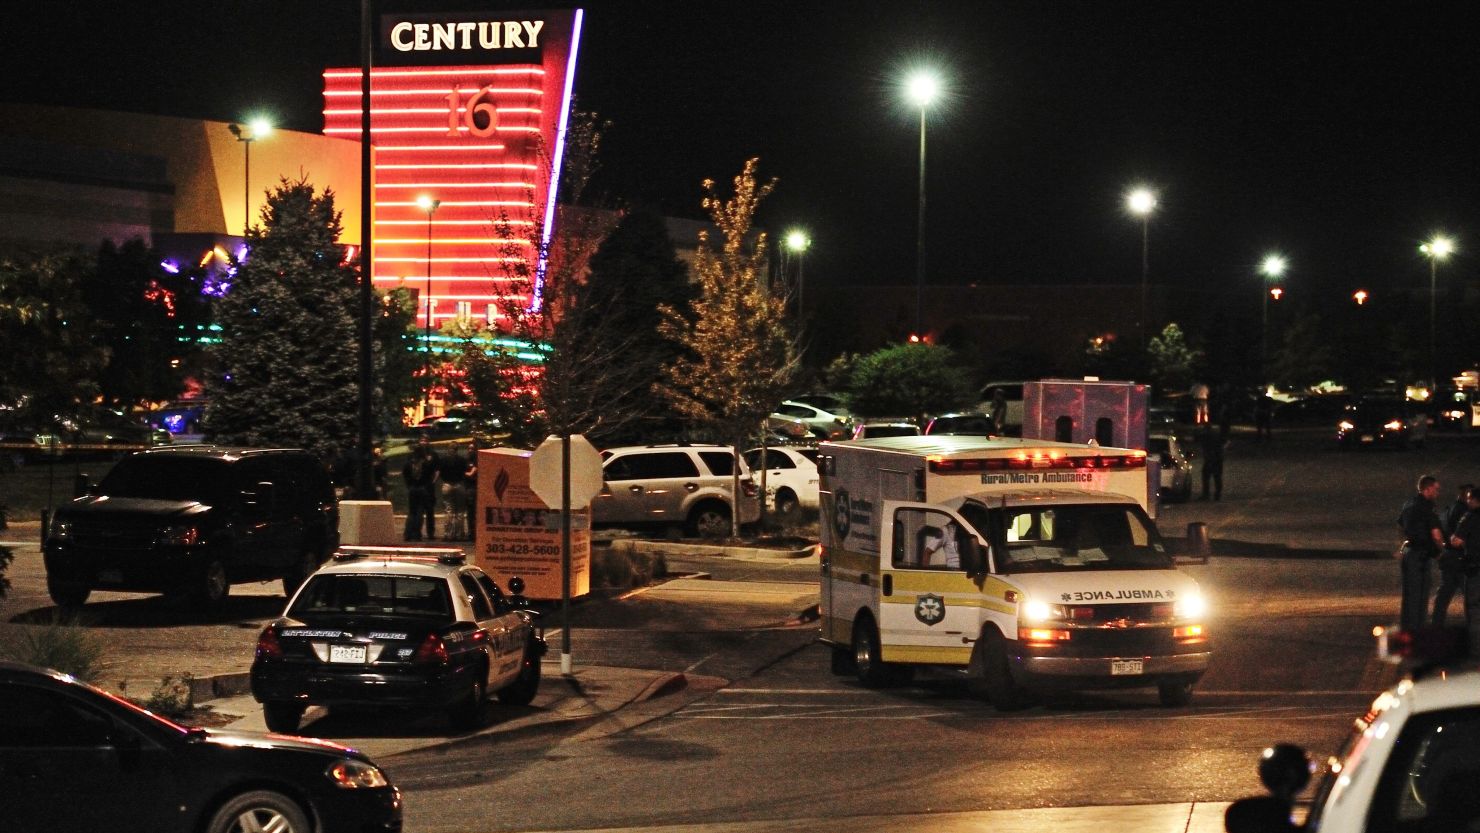 Emergency vehicles converged on the Century 16 Theater to treat victims.